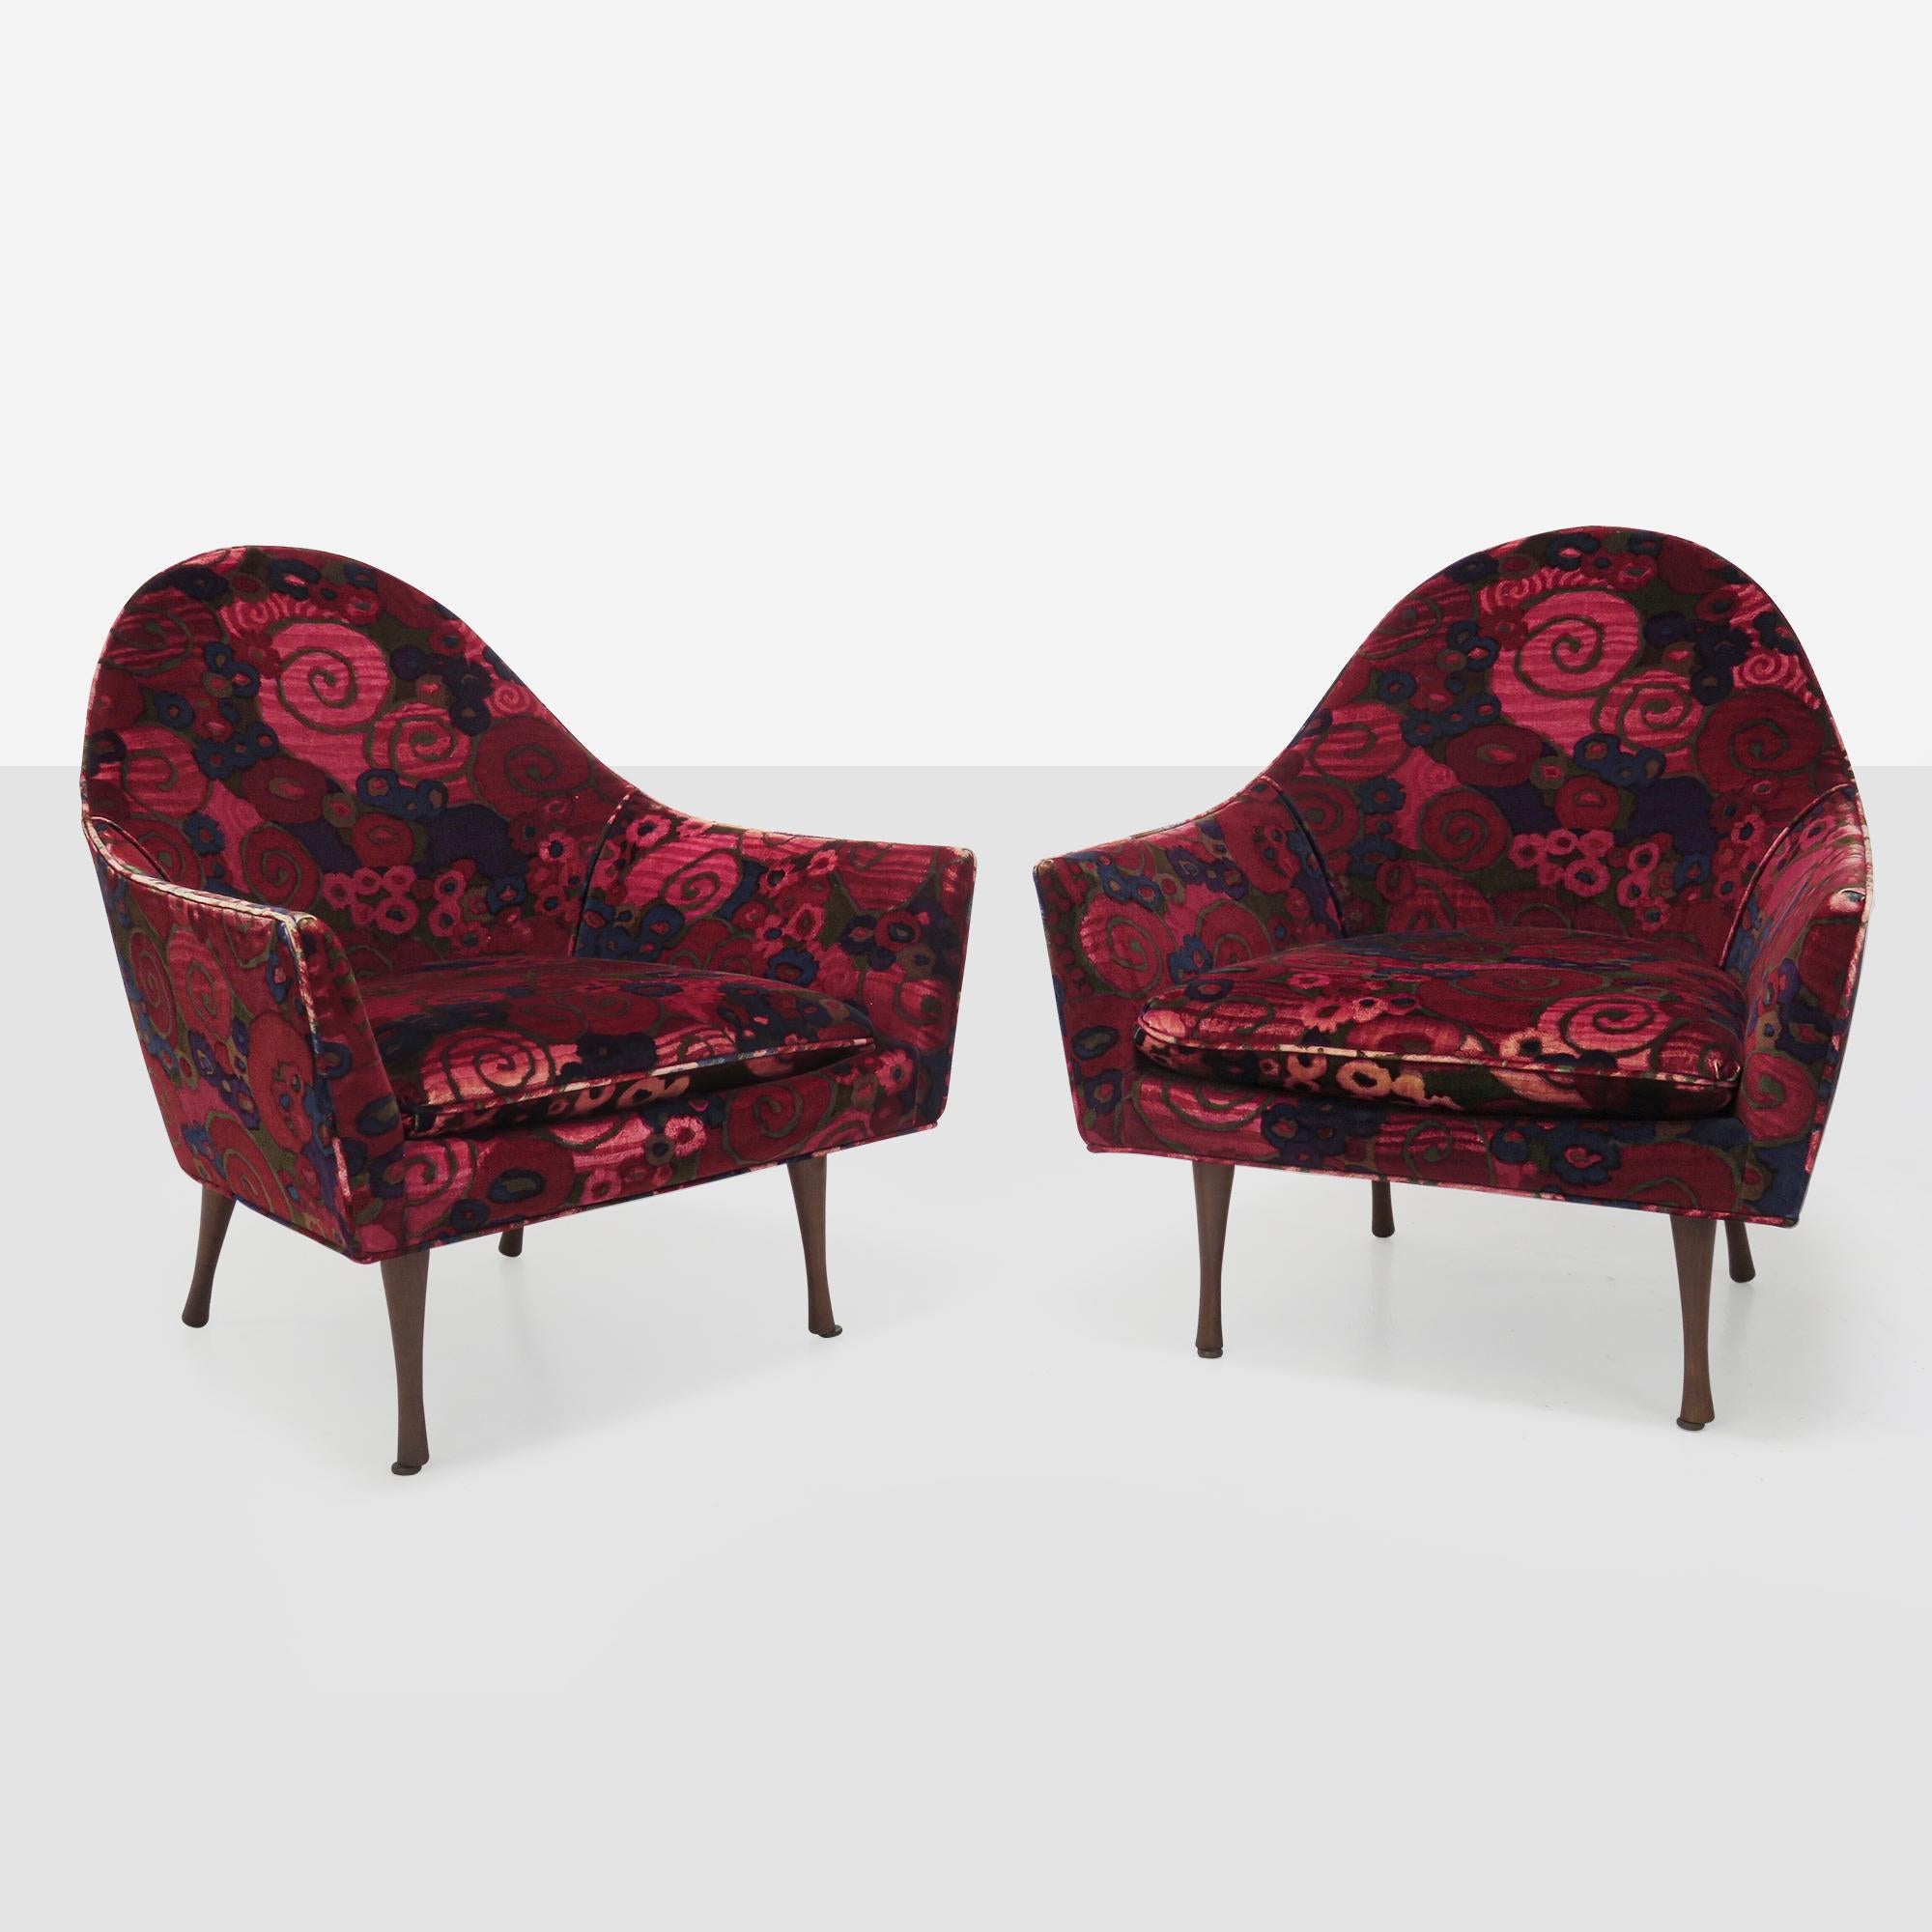 Upholstery Paul McCobb Lounge Chairs with Rare Original Vintage Jack Lenor Larsen Fabric  For Sale